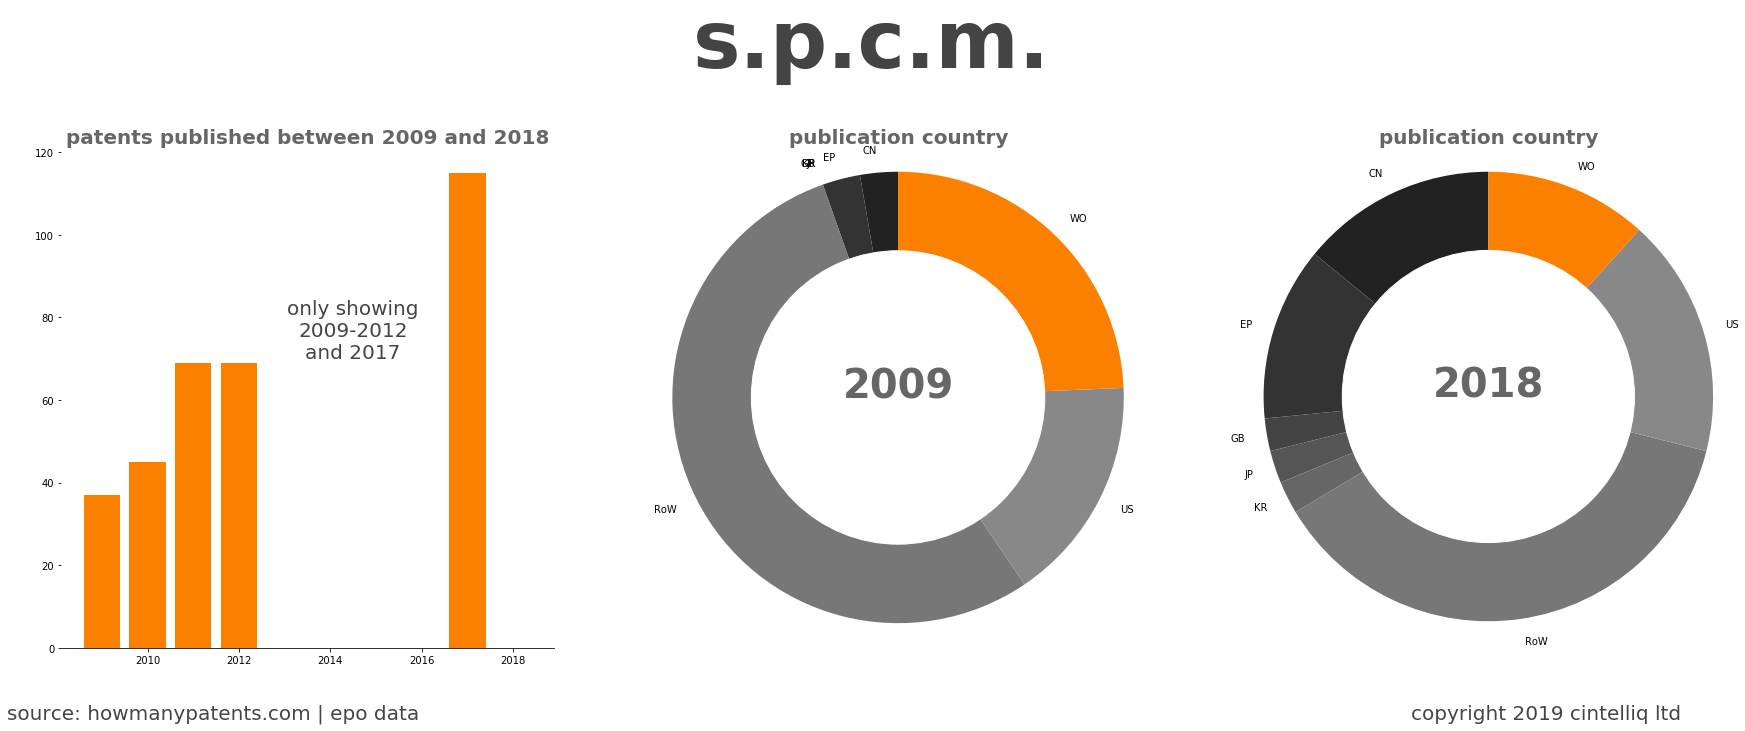 summary of patents for S.P.C.M.